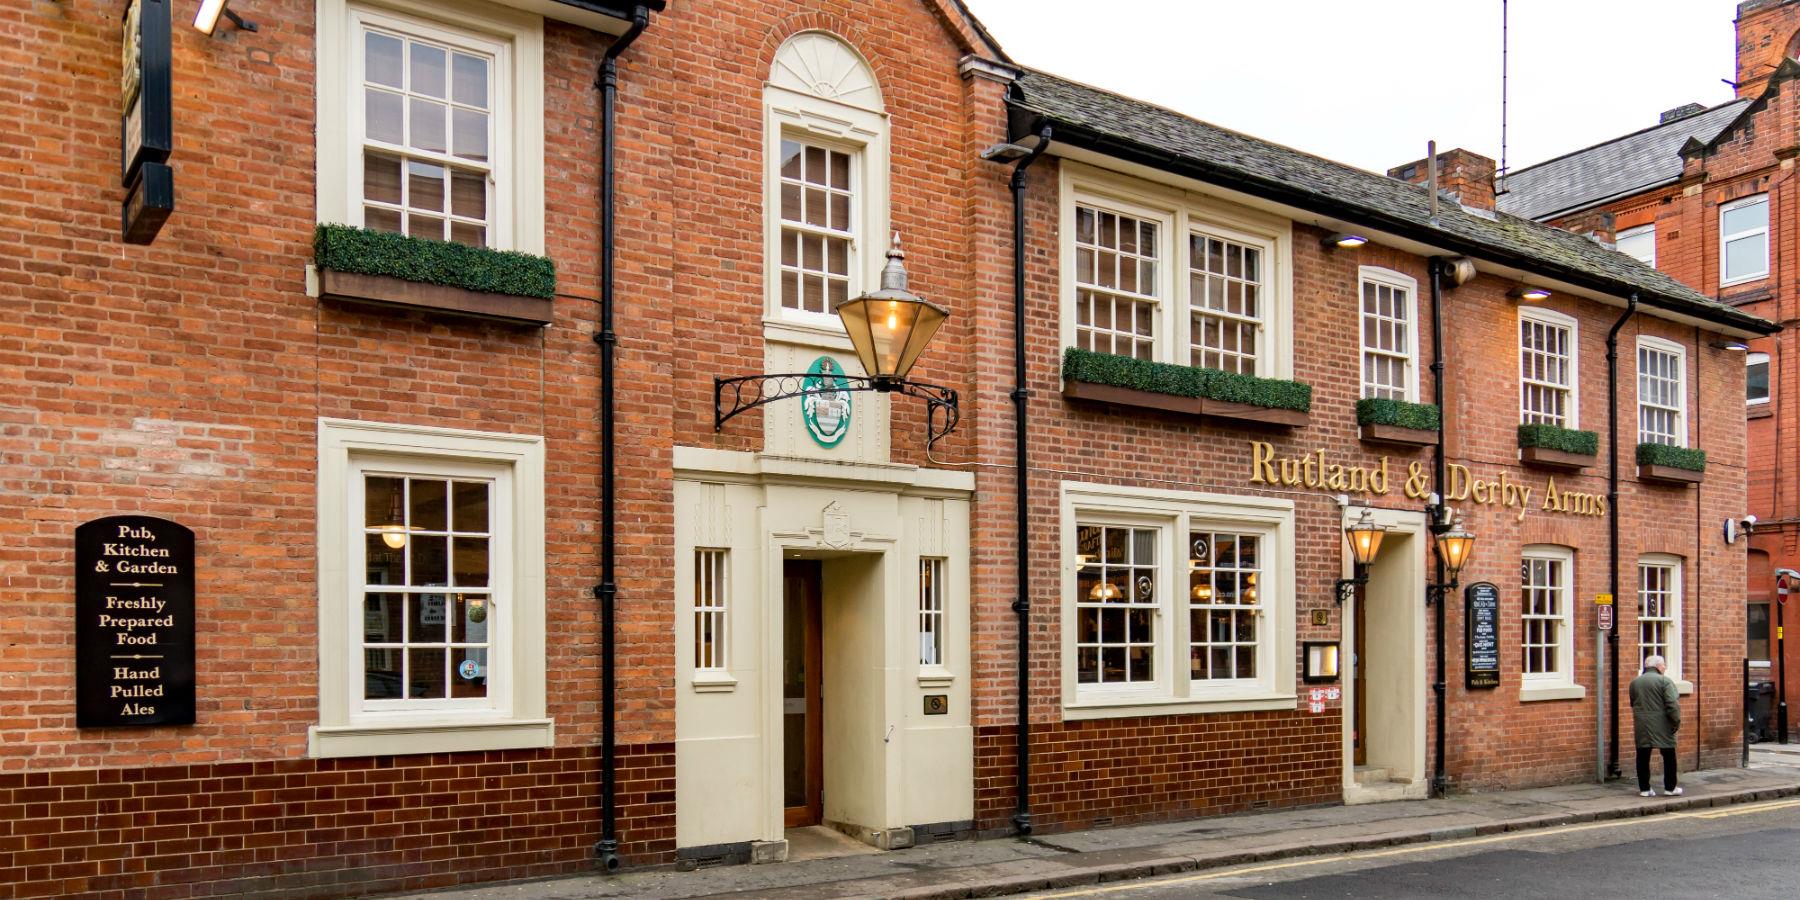 The Rutland & Derby Arms, Pubs - Eating and Drinking in Leicester